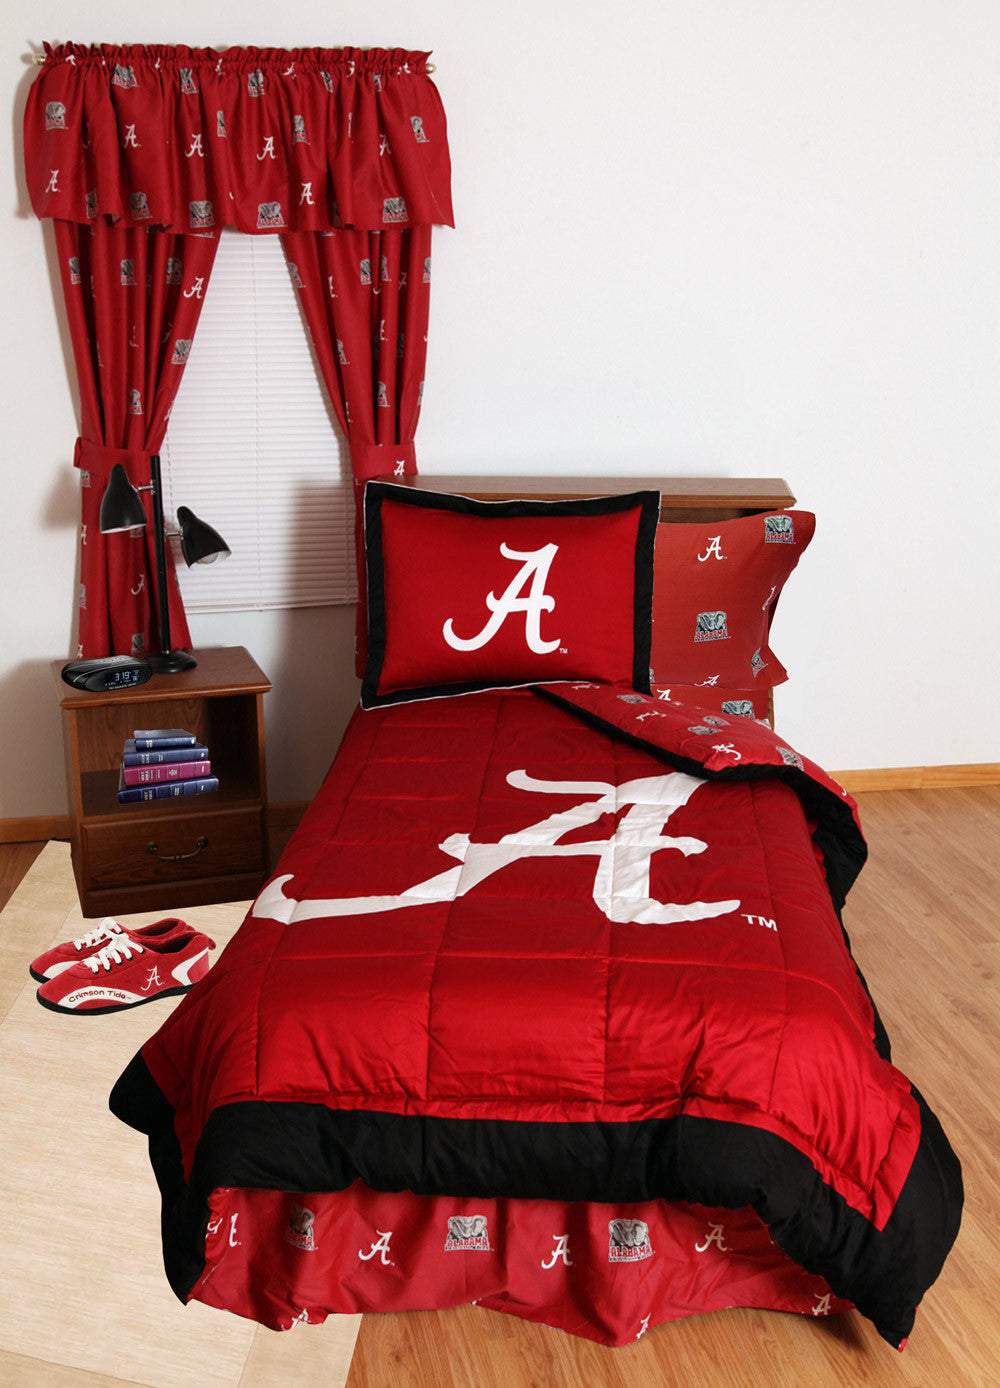 Alabama Bed In A Bag Twin - With Team Colored Sheets - Alabbtw By College Covers